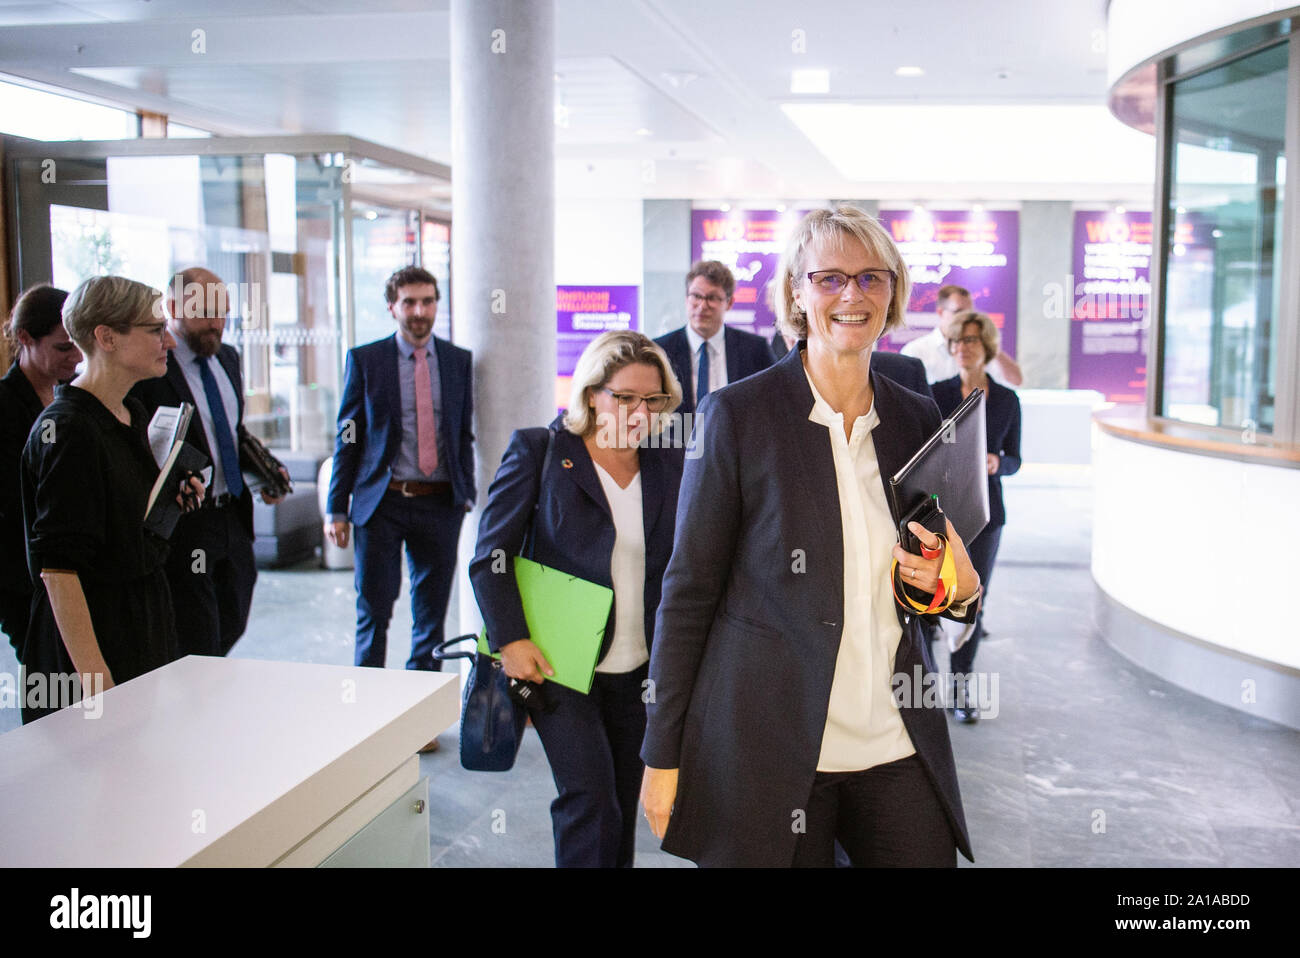 Germany. 25th Sep, 2019. Svenja Schulze (SPD, centre l), Federal Environment Minister, and Anja Karliczek (CDU, centre r), Federal Minister of Education and Research, will attend a press conference at the Federal Ministry of Research and Education on the Special Report of the Intergovernmental Panel on Climate Change (IPCC) presented in Monaco on Wednesday. Researchers address the impact of climate change on oceans and ice areas and the consequences for human society. Credit: Arne Immanuel Bänsch/dpa/Alamy Live News Stock Photo